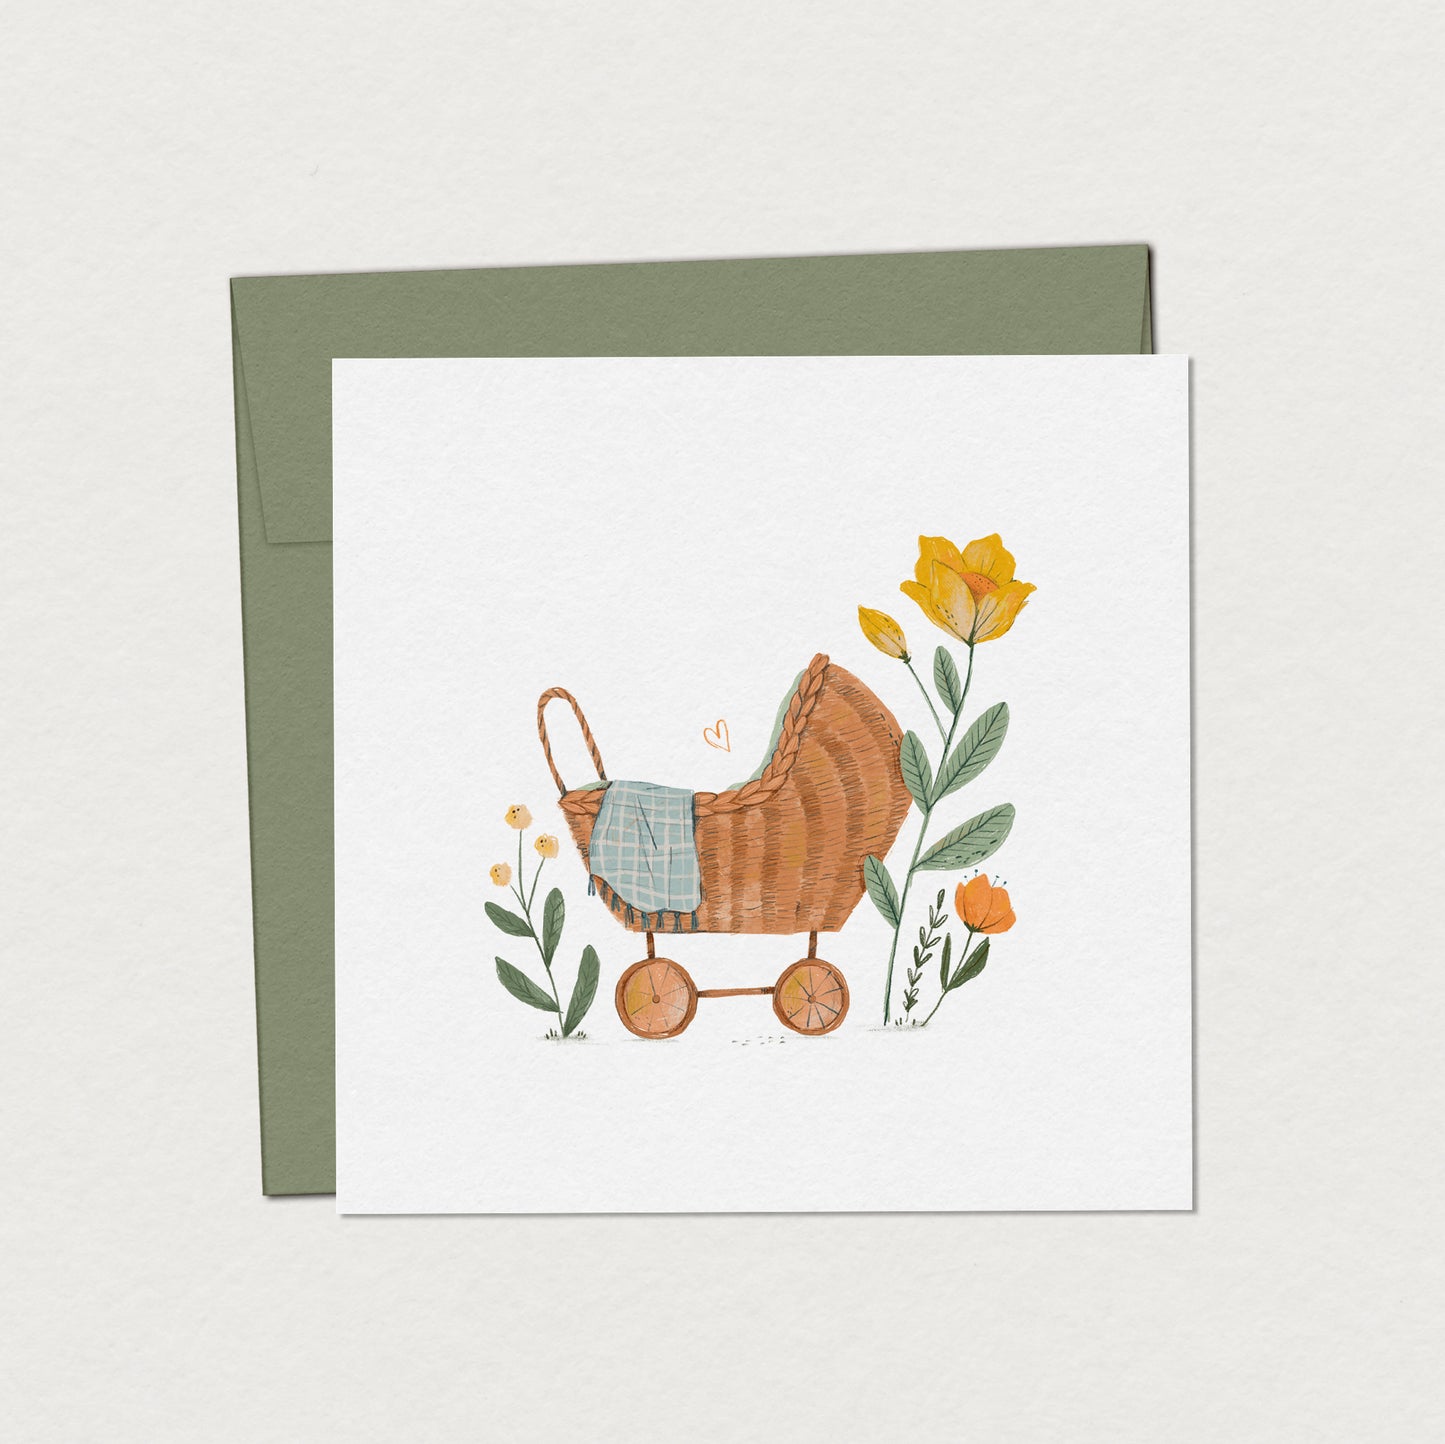 Card - Baby Carriage